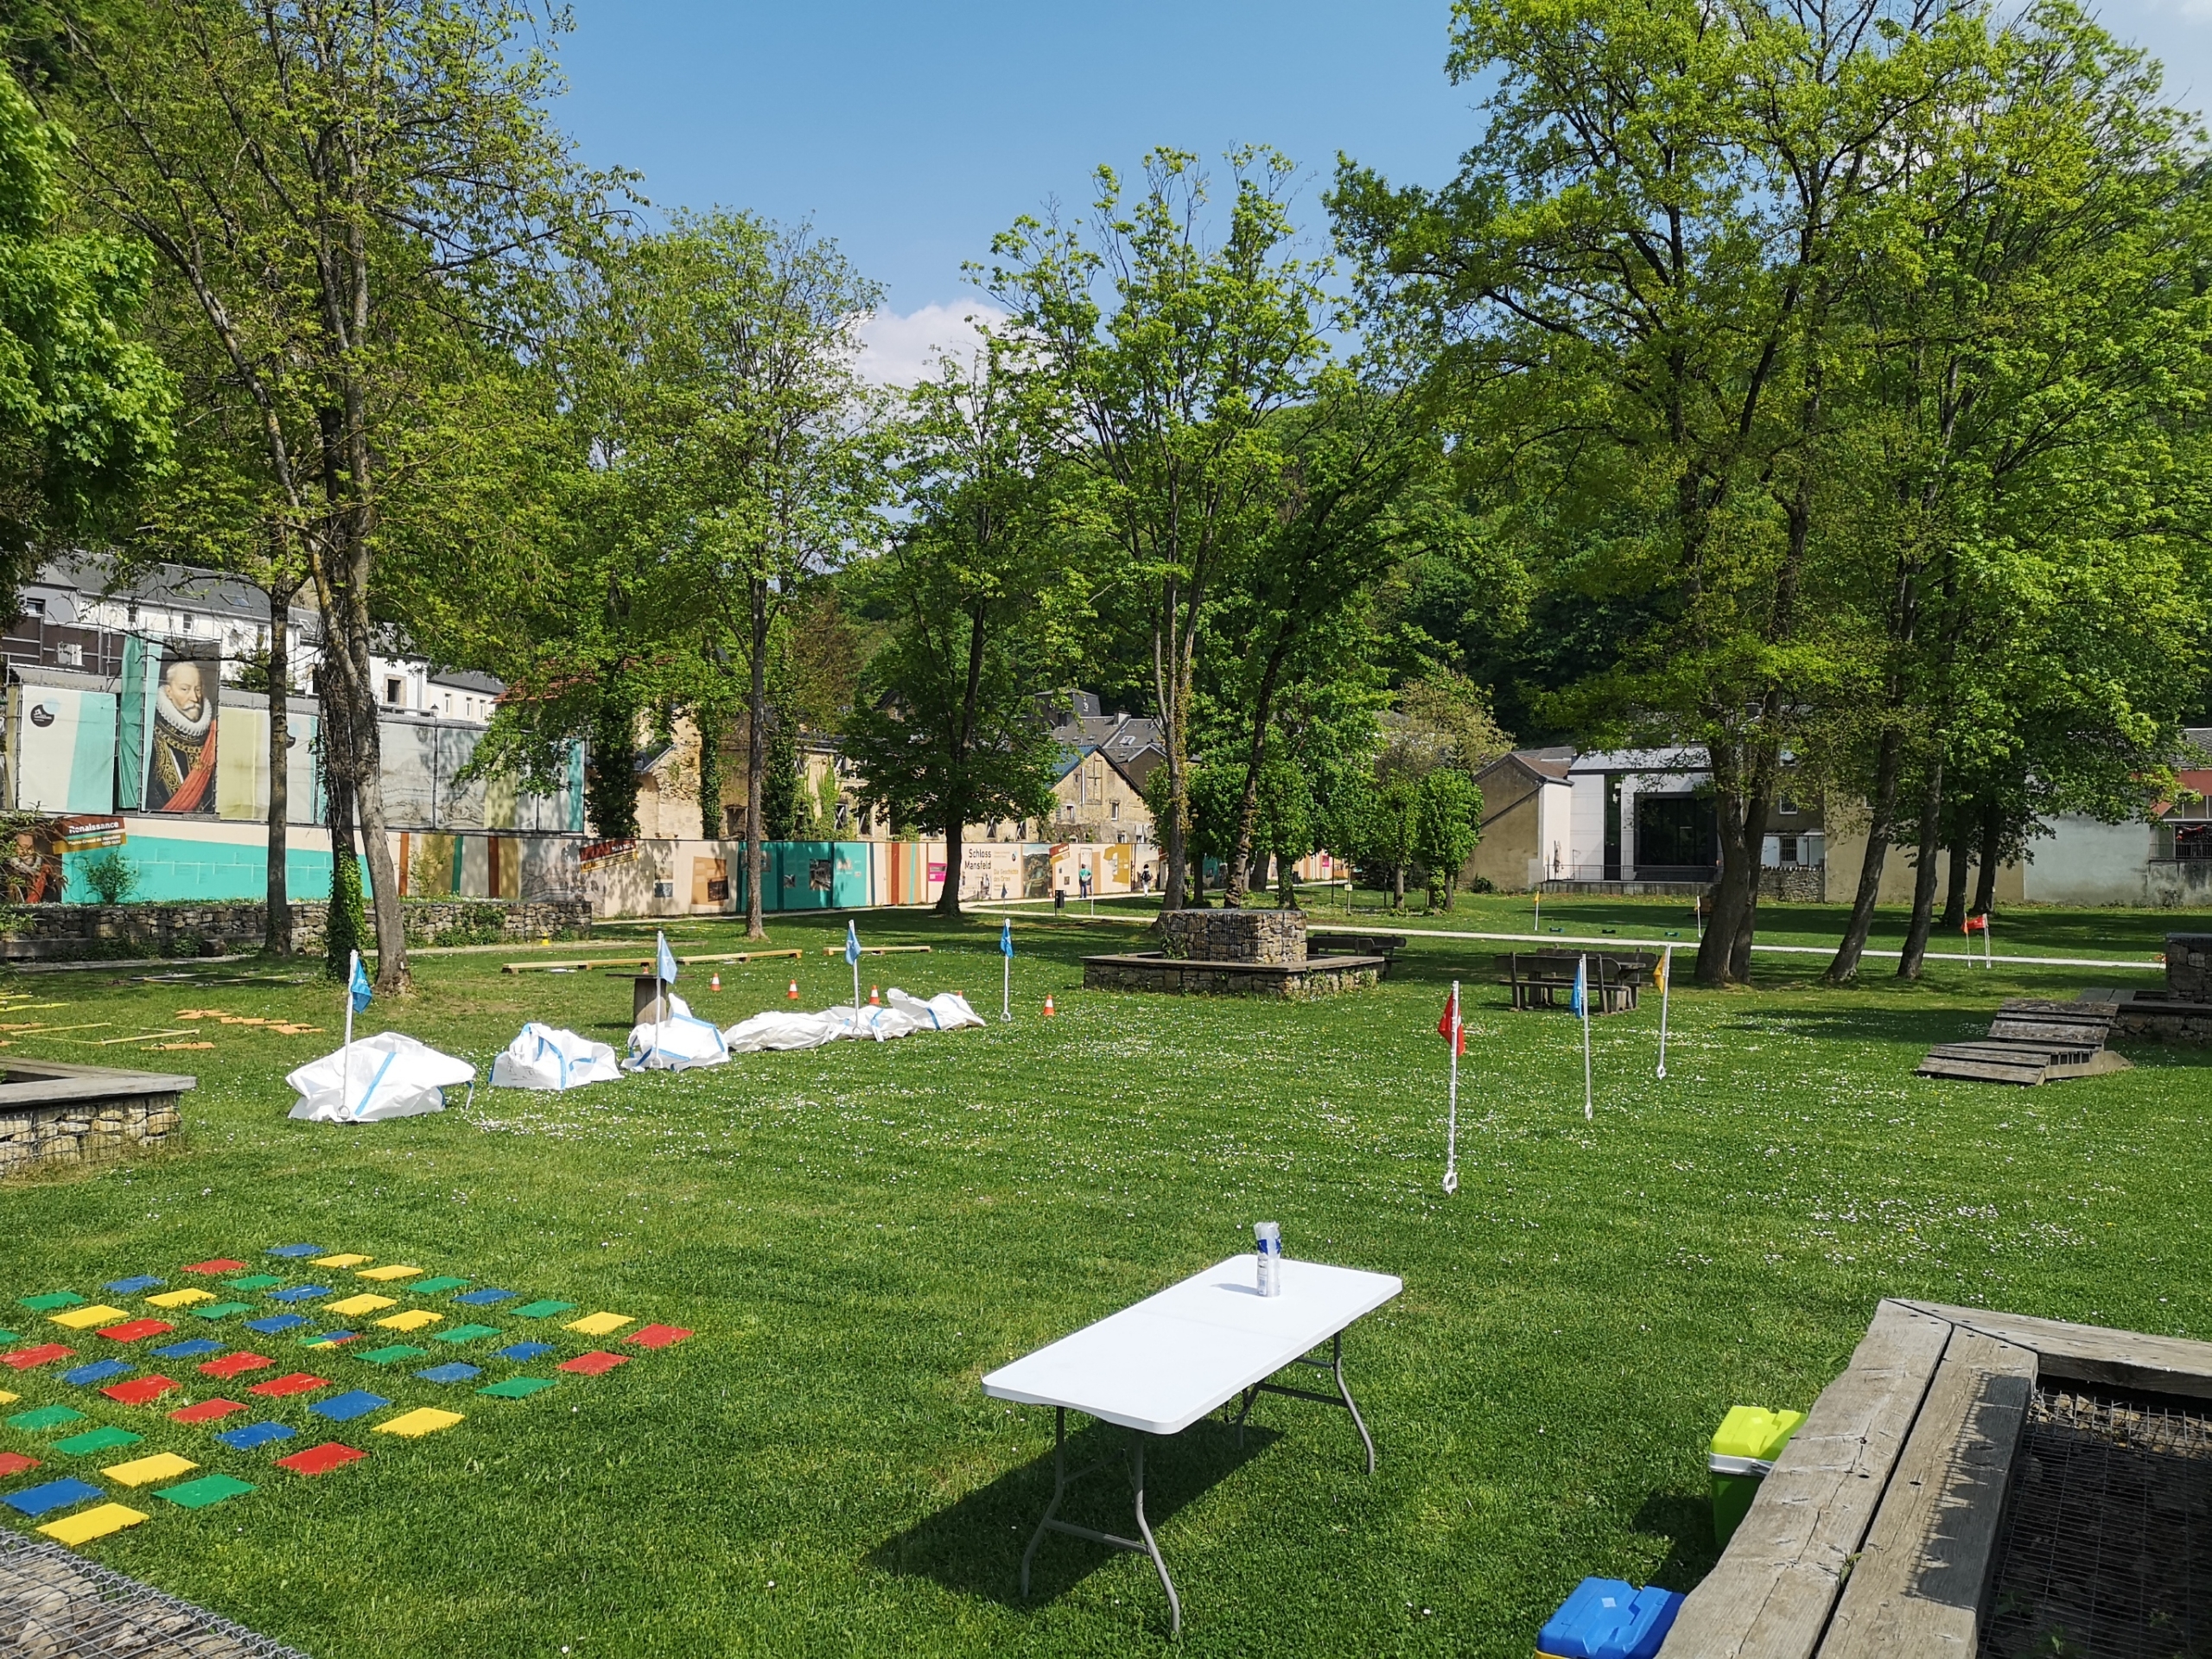 Teambuilding at the playground of Tero River house Luxembourg